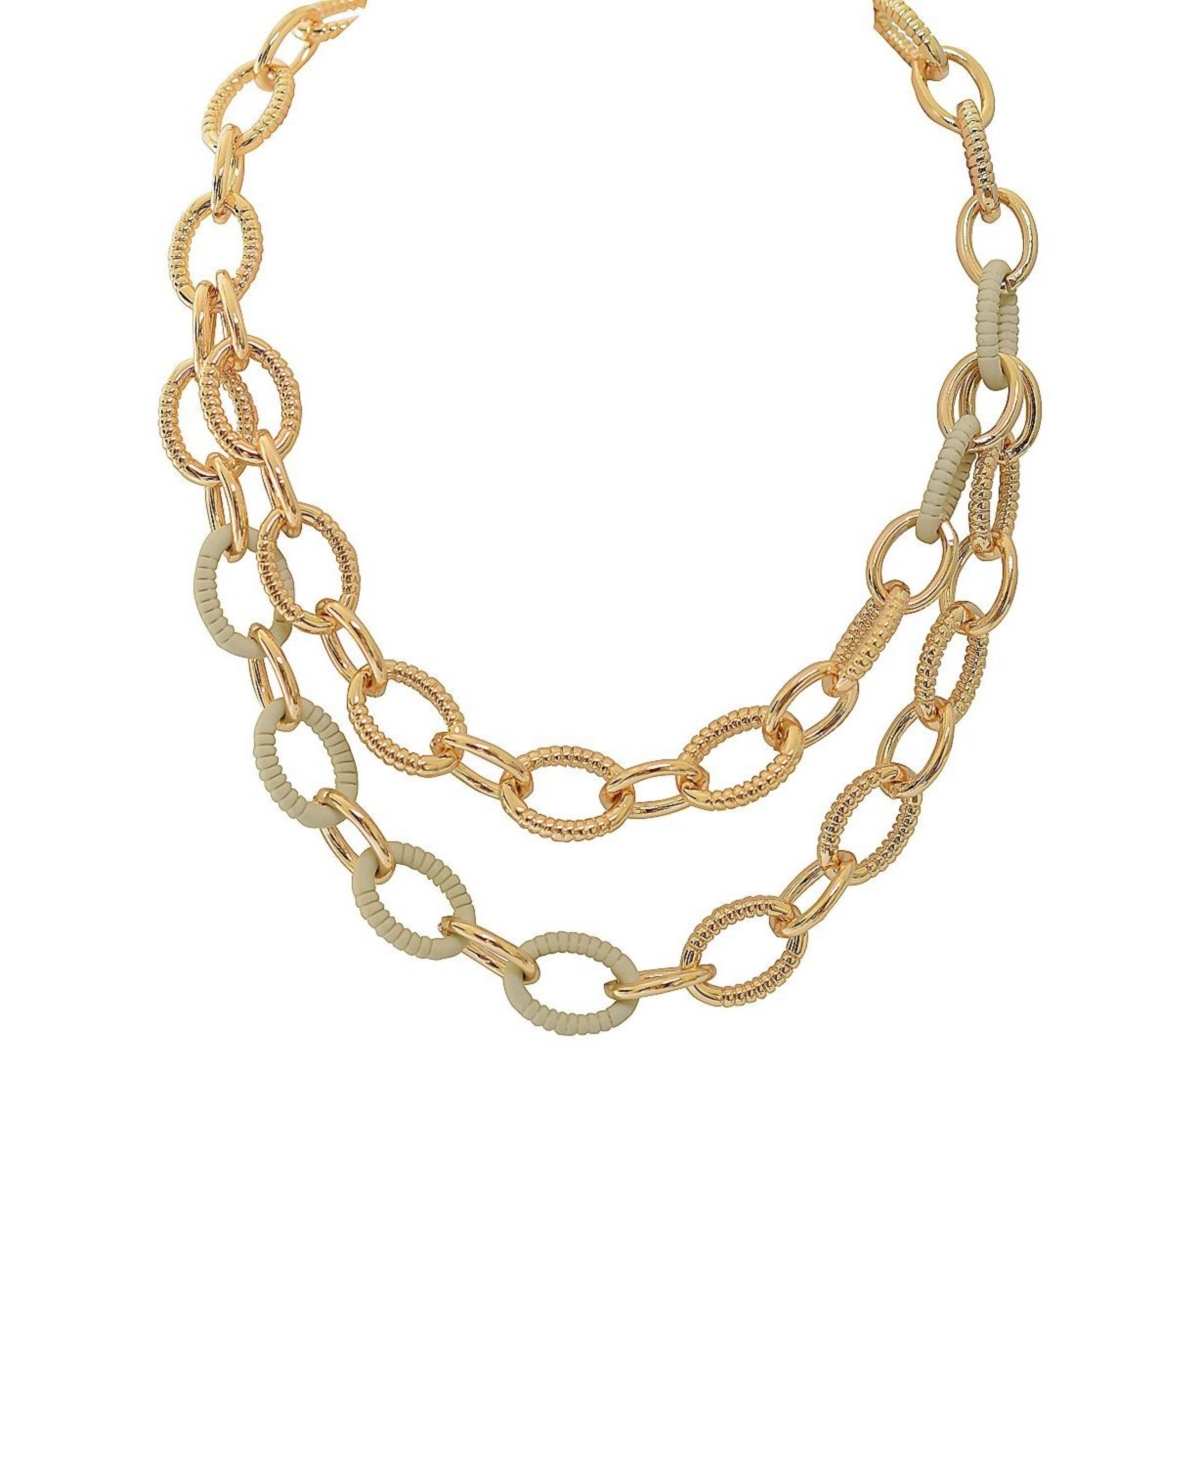 Textured Link Chain Collar Necklace - Gold